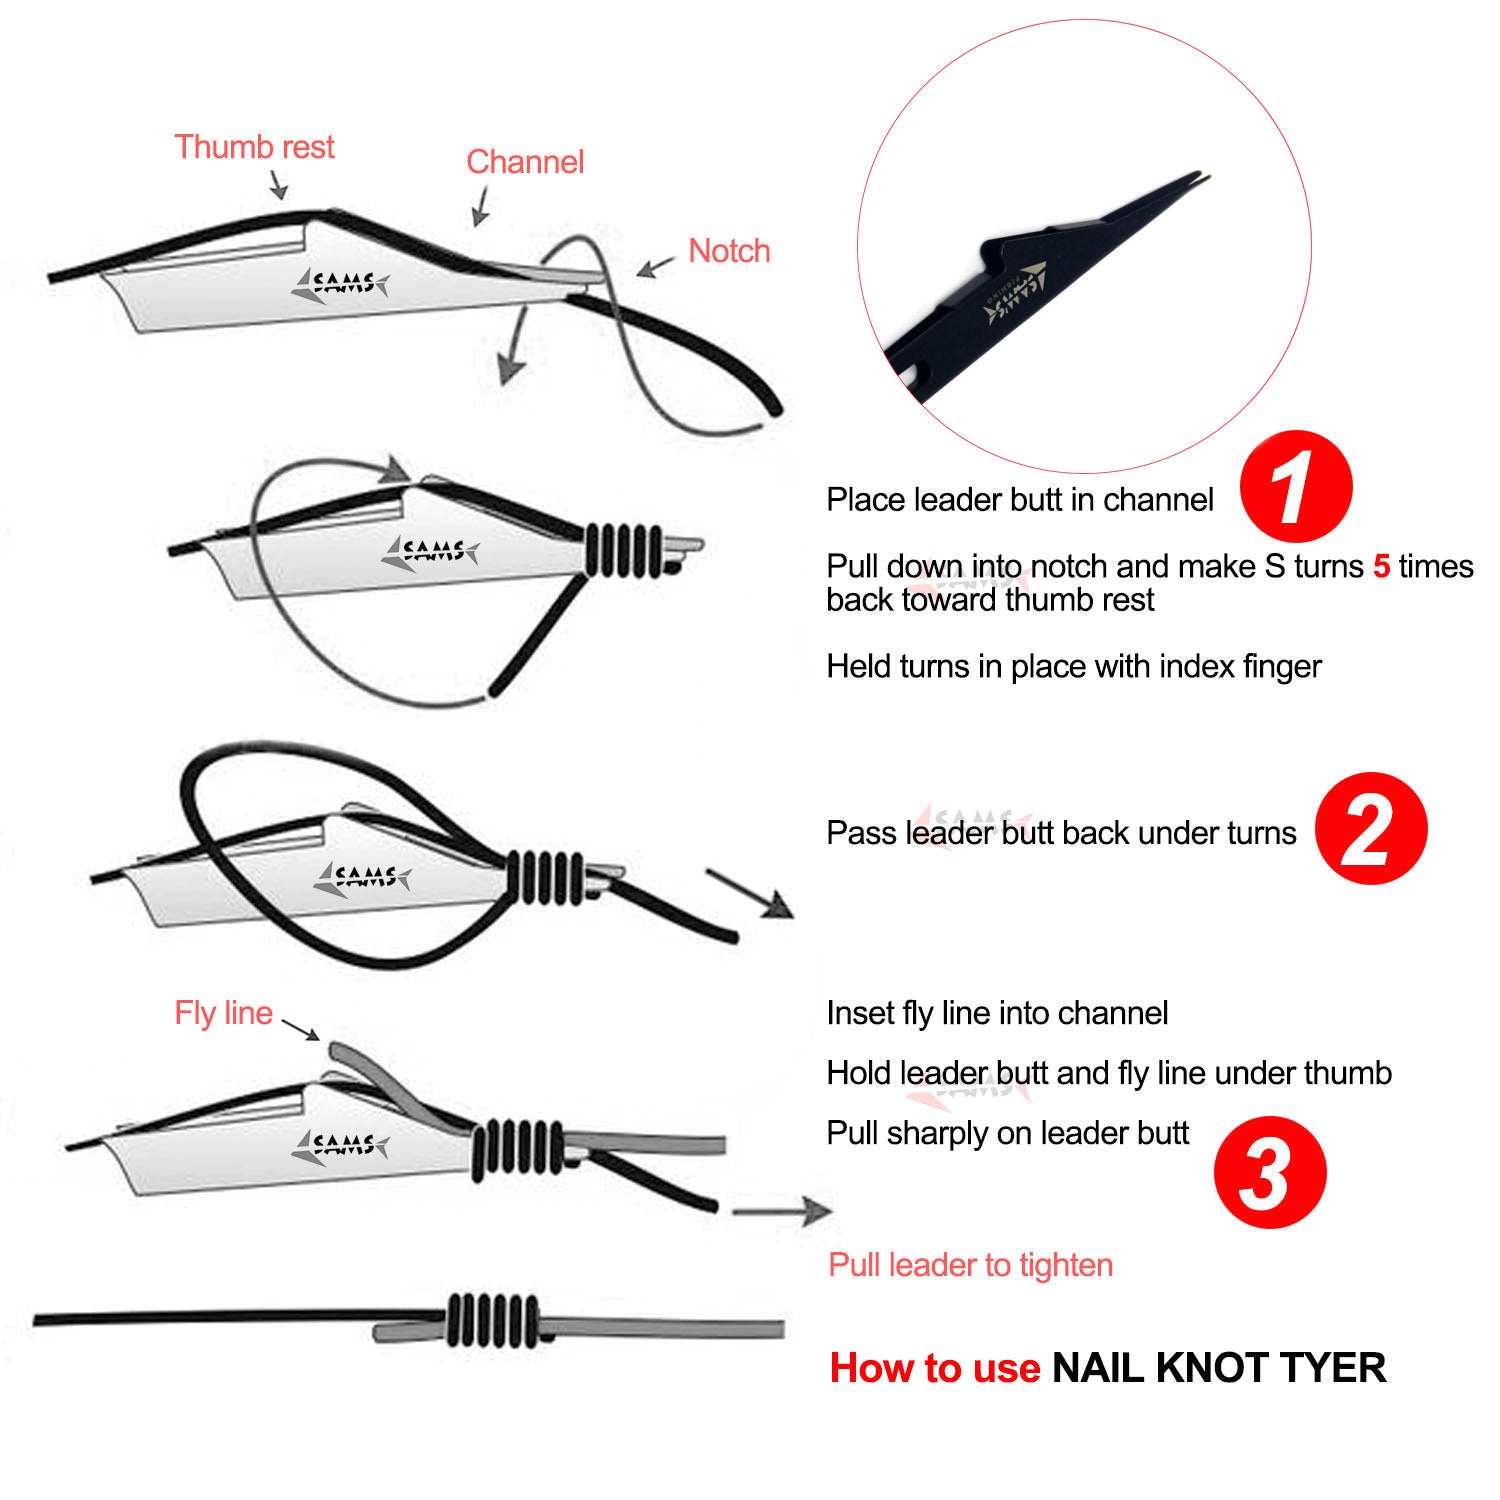 Tie-Fast Nail Knot-Tying Tool